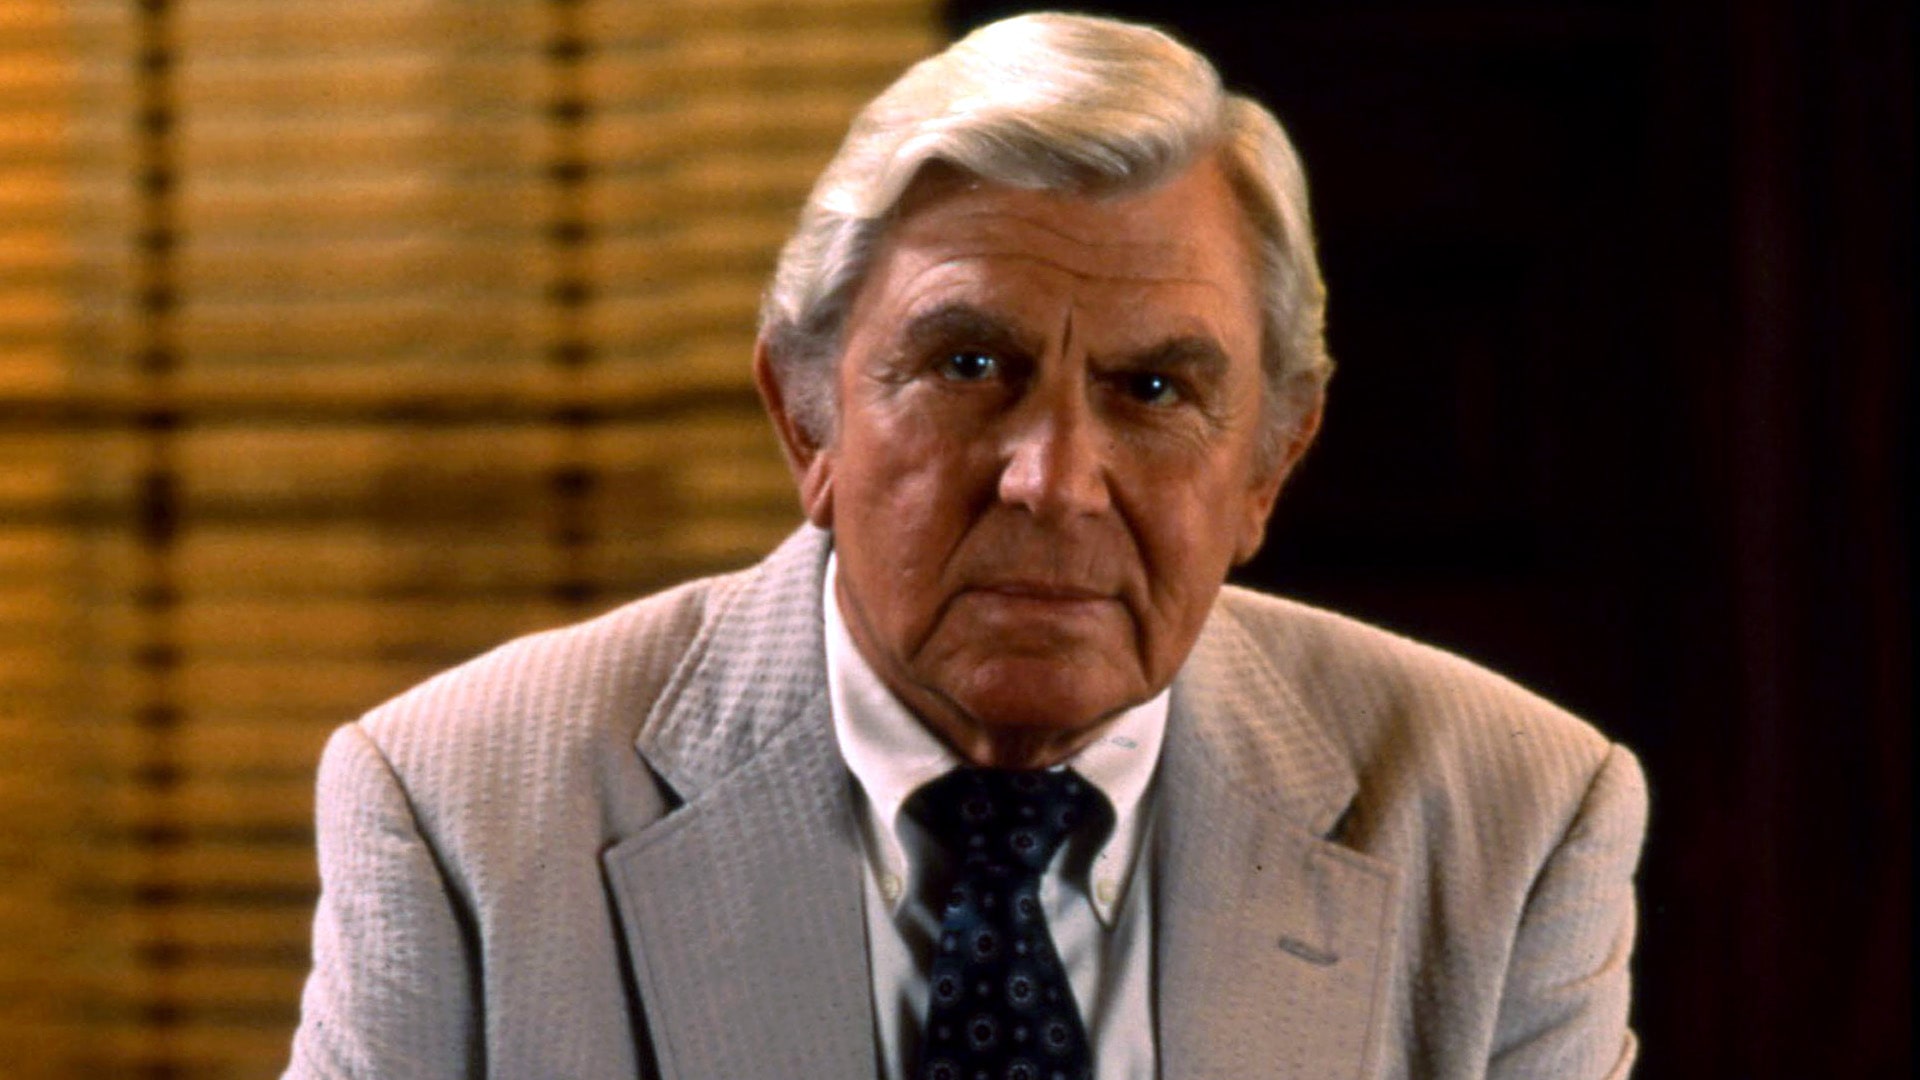 Matlock Season 1 Watch for Free in HD on Movies123